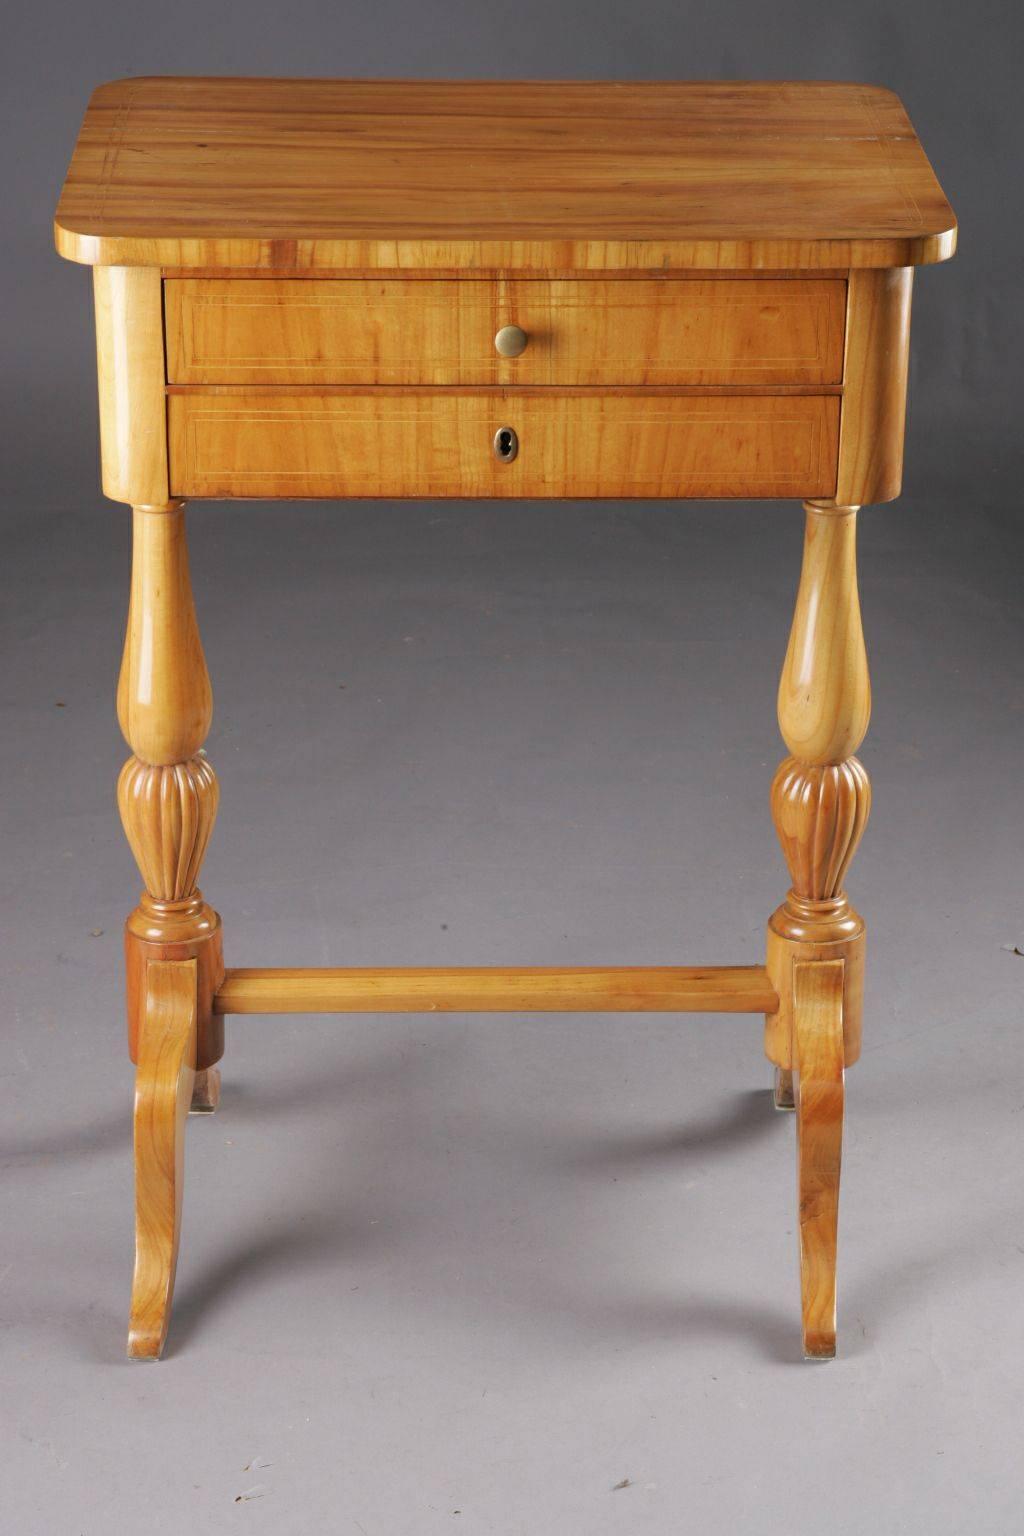 Cherrywood on solid softwood. Straight, two-wise frame box made of baluster-shaped columns, connected by turned column. Four-sided tabletop in compartments for sewing utensils.

(G-24).